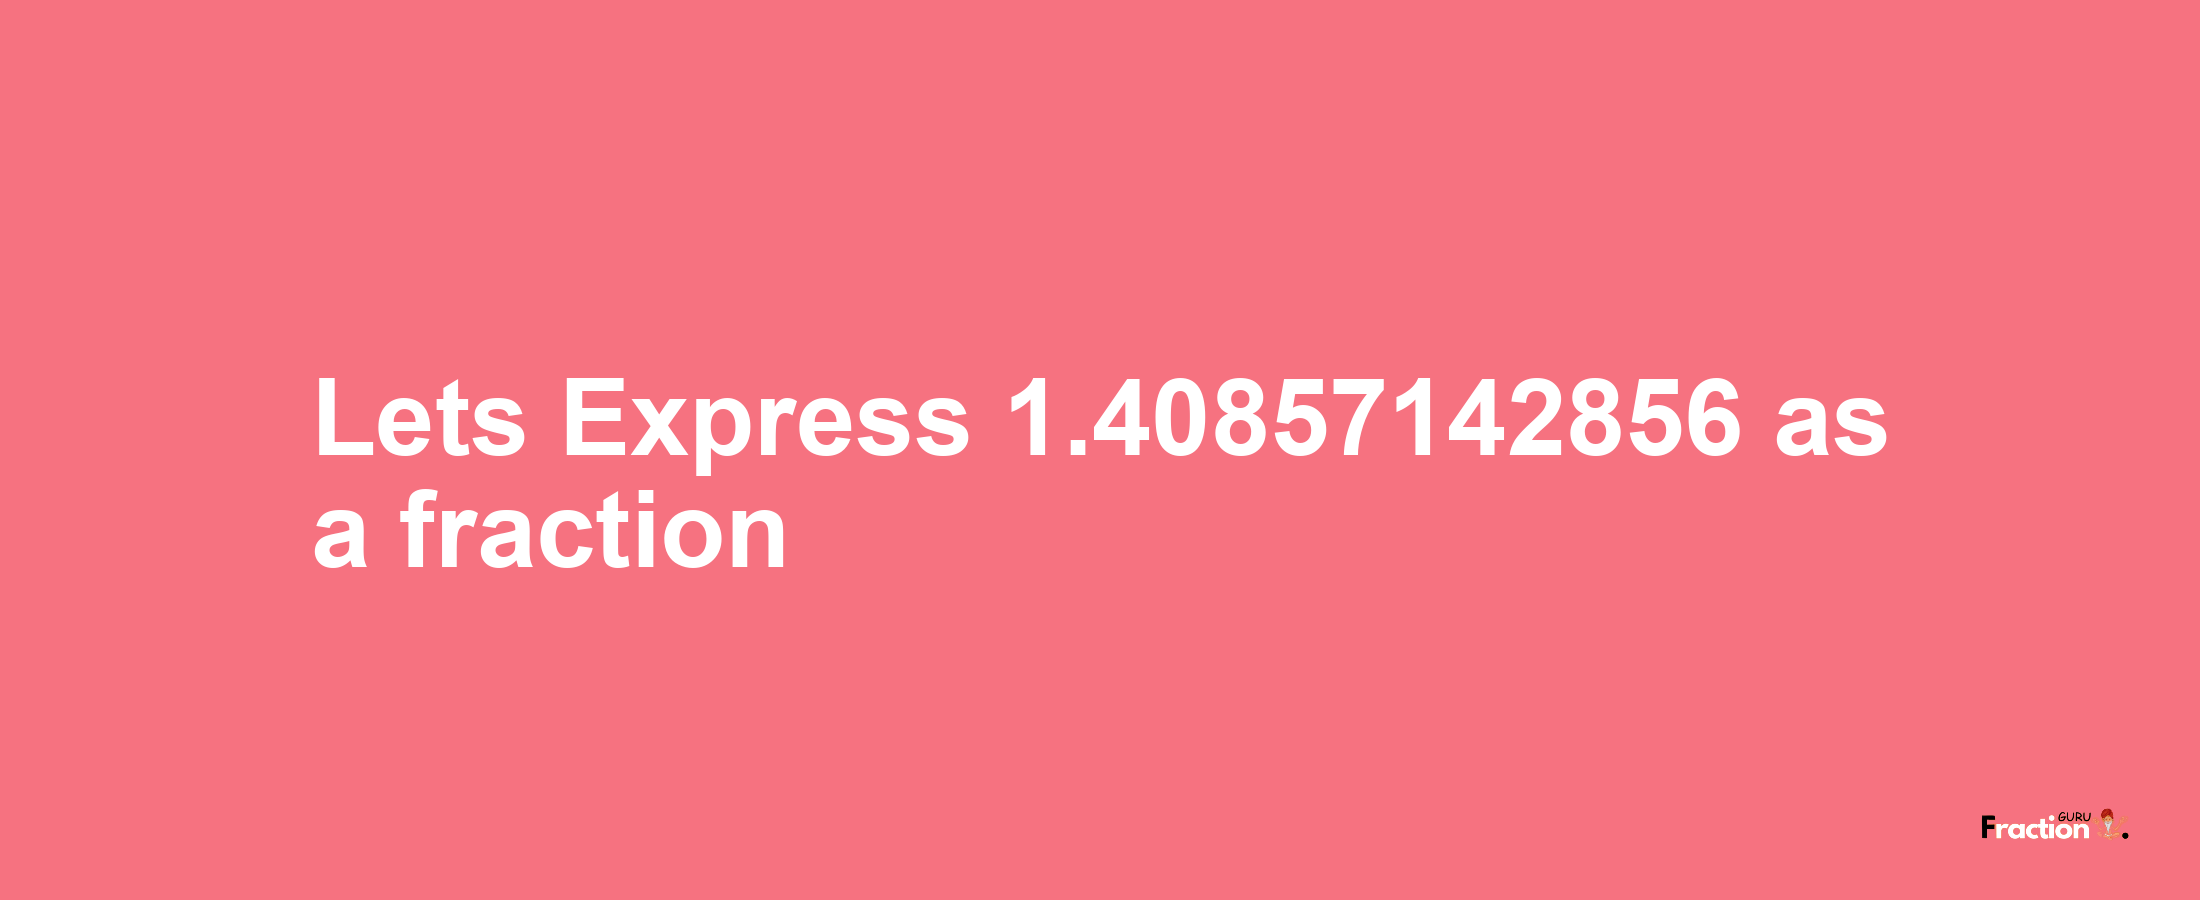 Lets Express 1.40857142856 as afraction